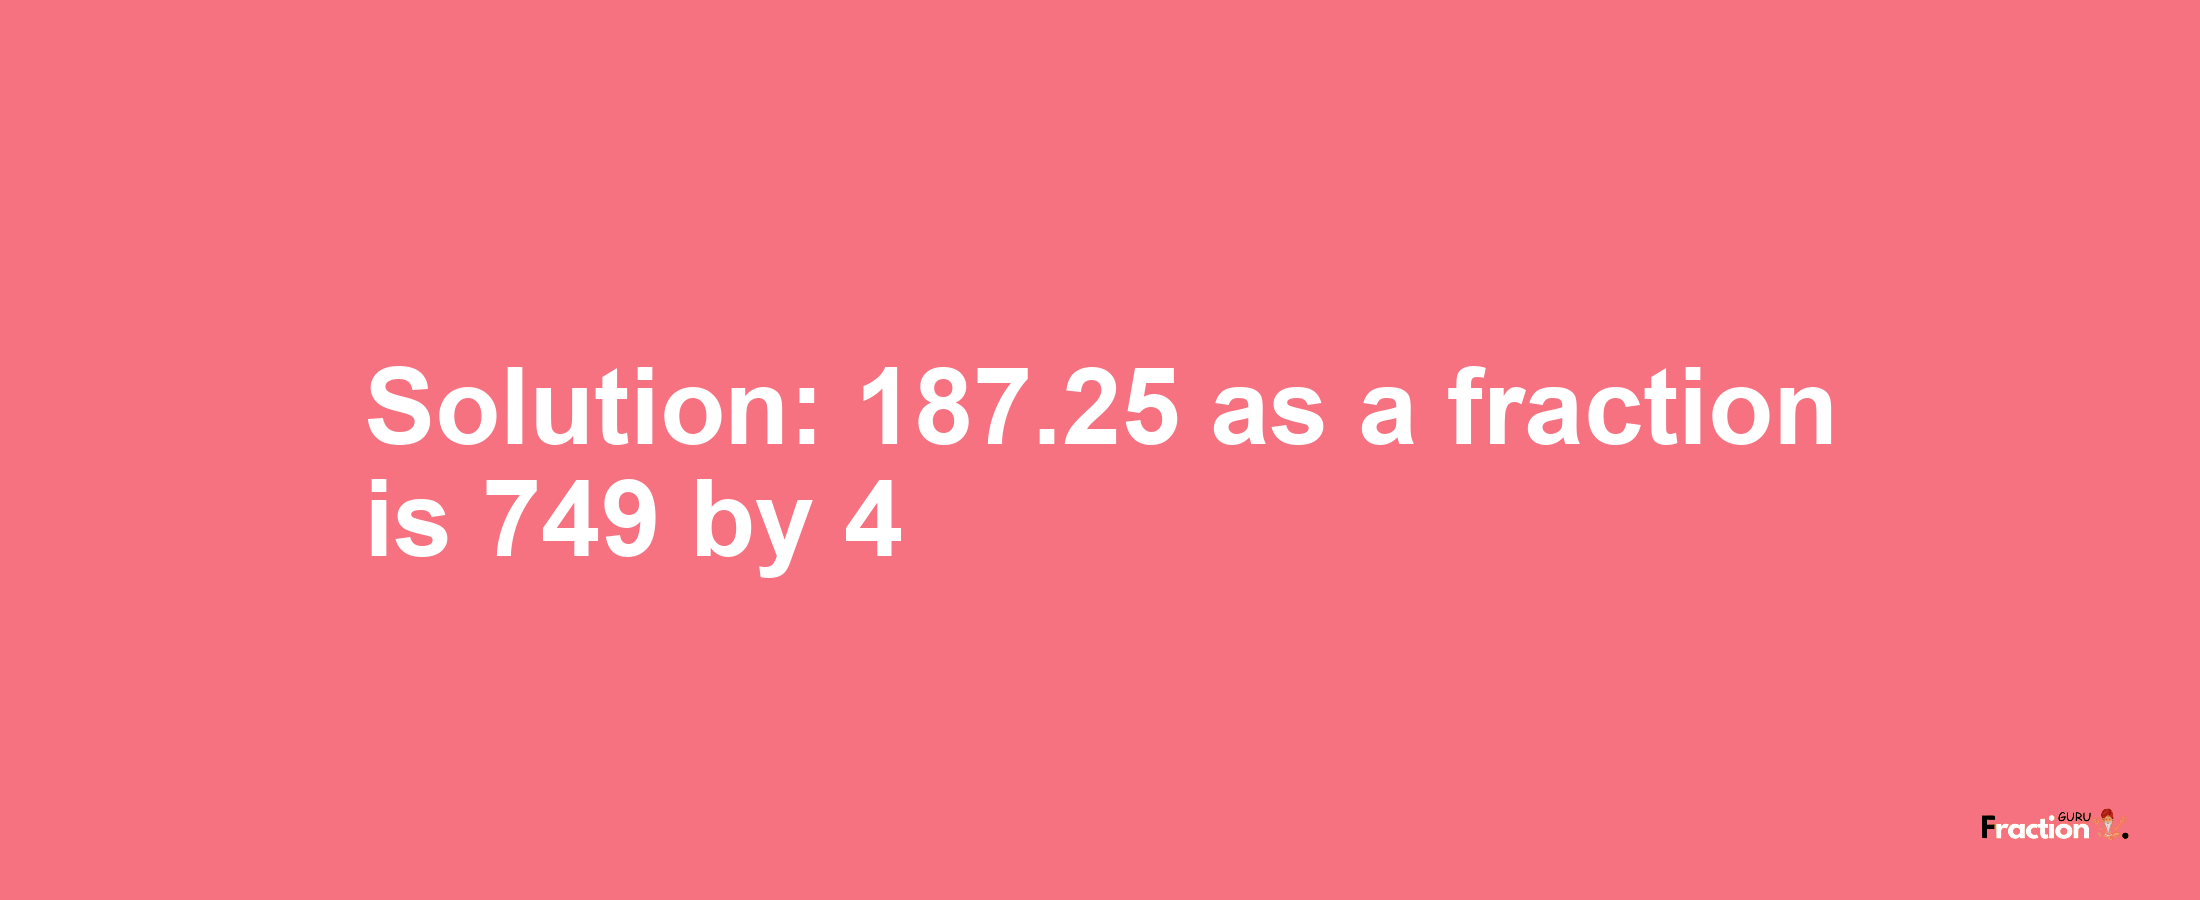 Solution:187.25 as a fraction is 749/4